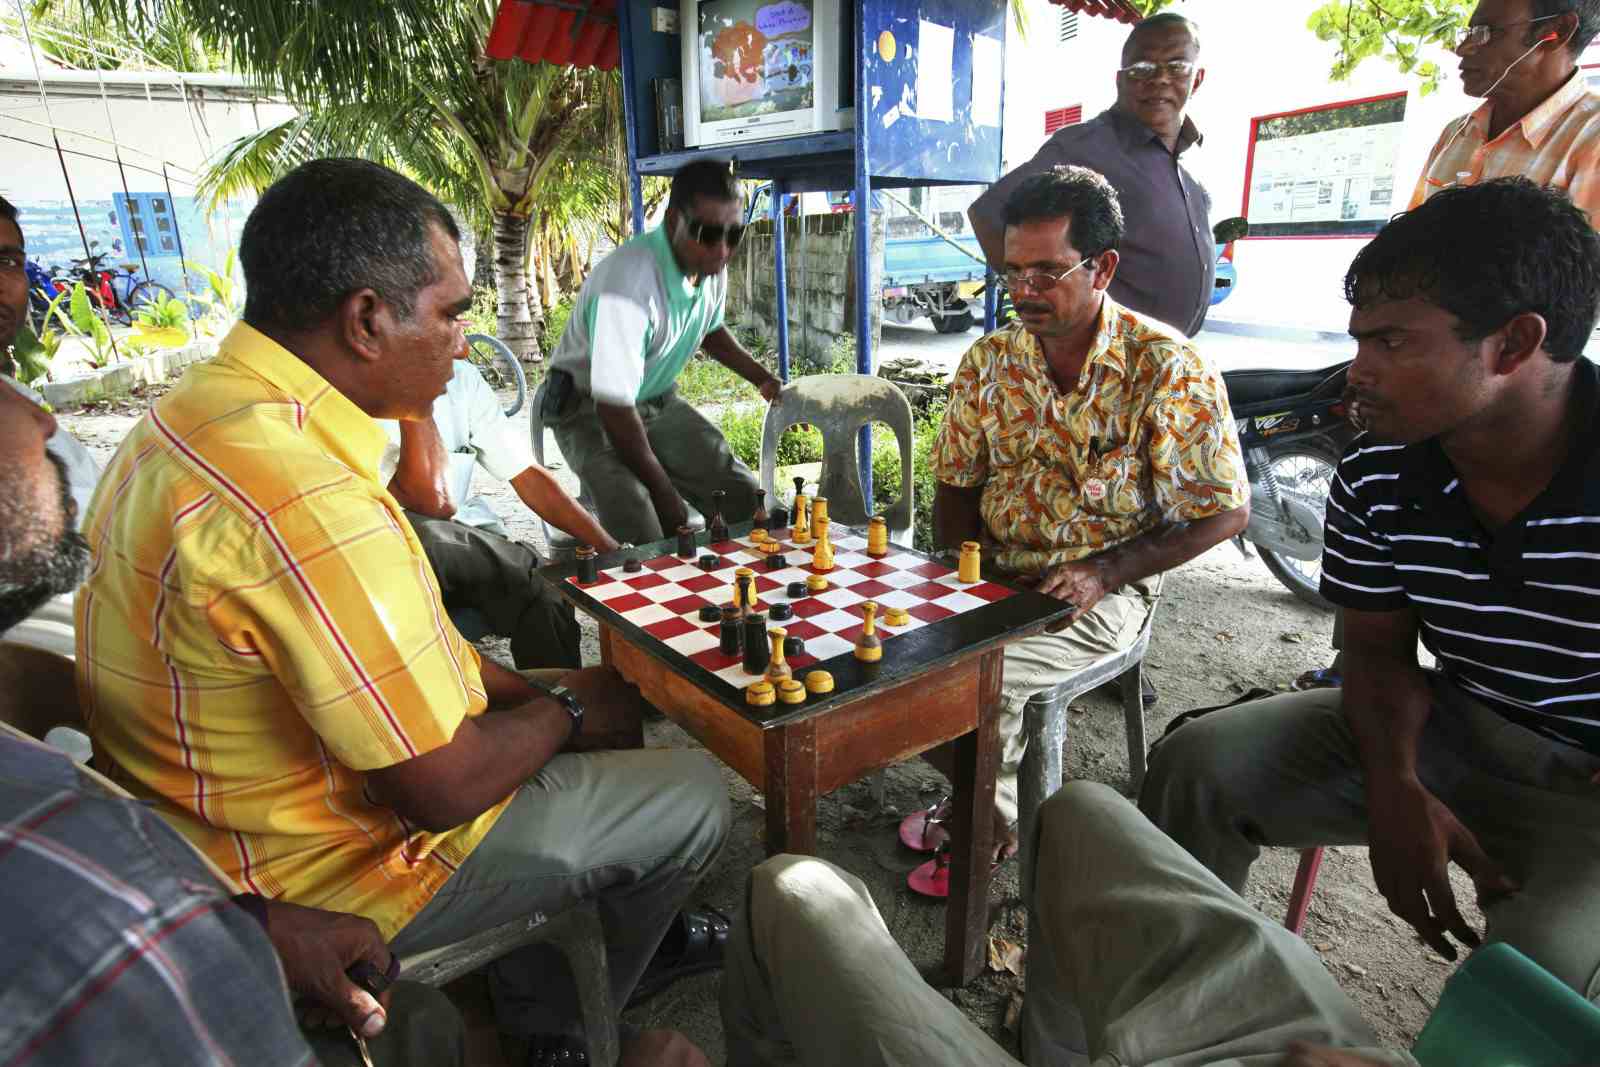 Local men playing chess in a village on September 27, 2009 on Fedu Island, Maldives (by EyesWideOpen/Getty Images)